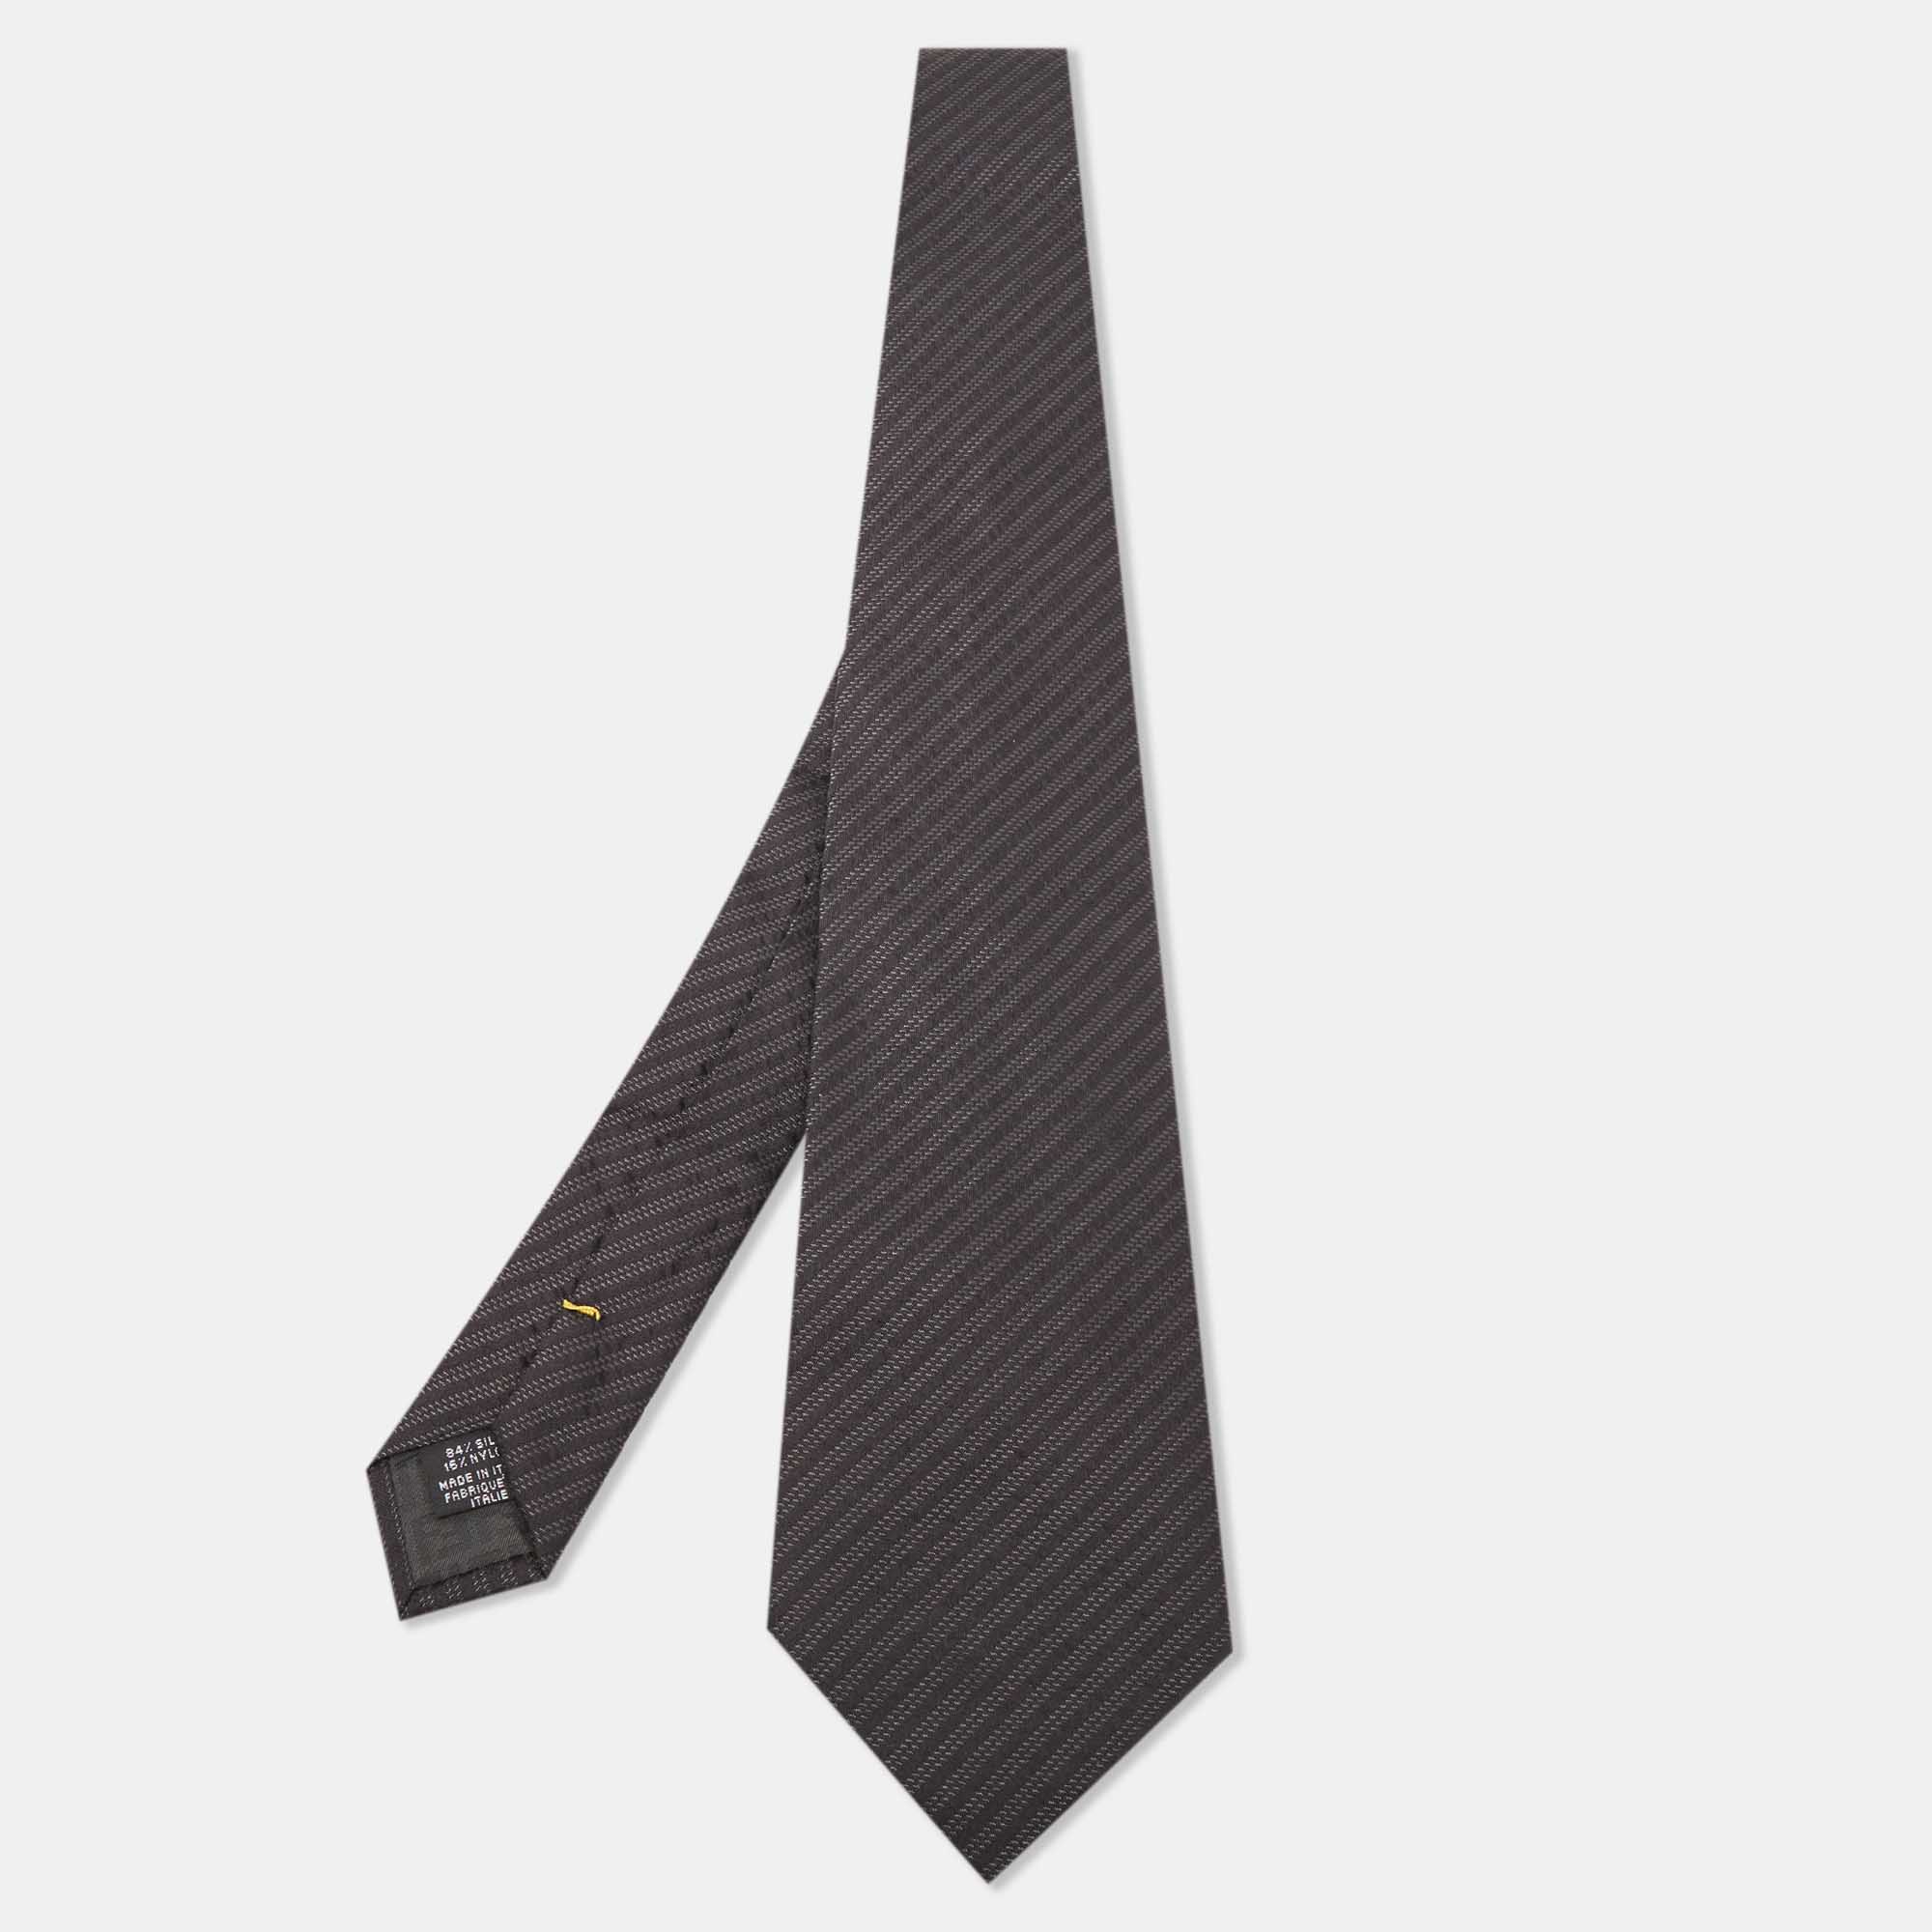 Pick this Fendi tie to give your formal look a touch of luxury. It is cut from silk and detailed with stripes all over. It is finished with the brand label on the back.